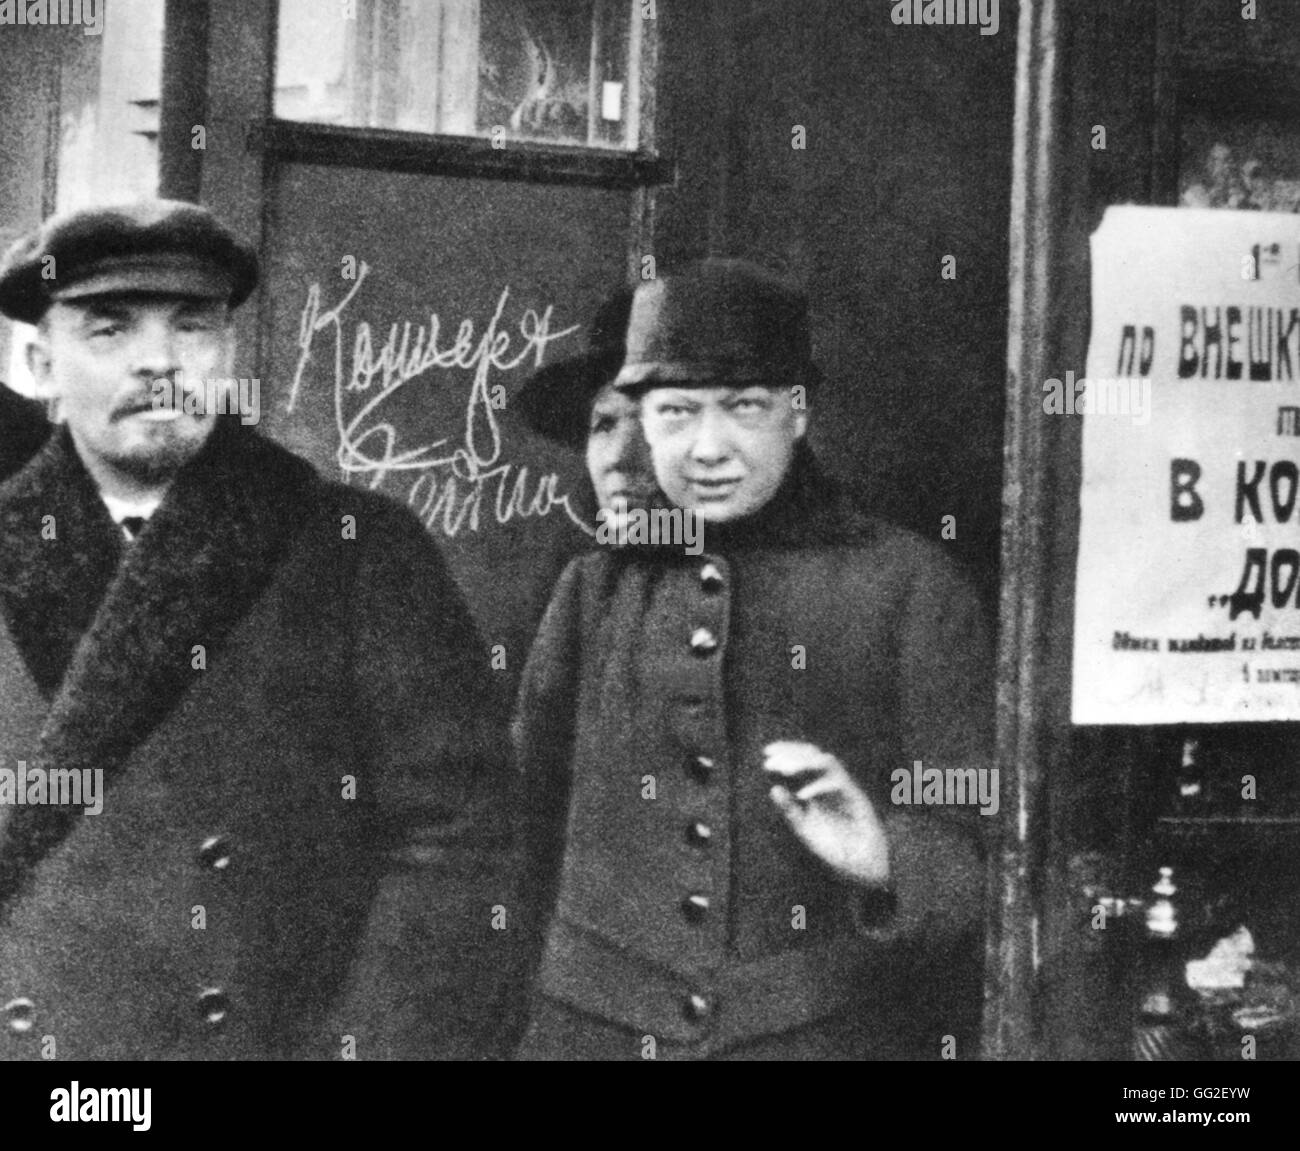 Moscow. Lenin and N.K. Kroupskya leaving the Trade Unions' House after the first All-Russia Congress on education May 6, 1919 U.S.S.R. Stock Photo